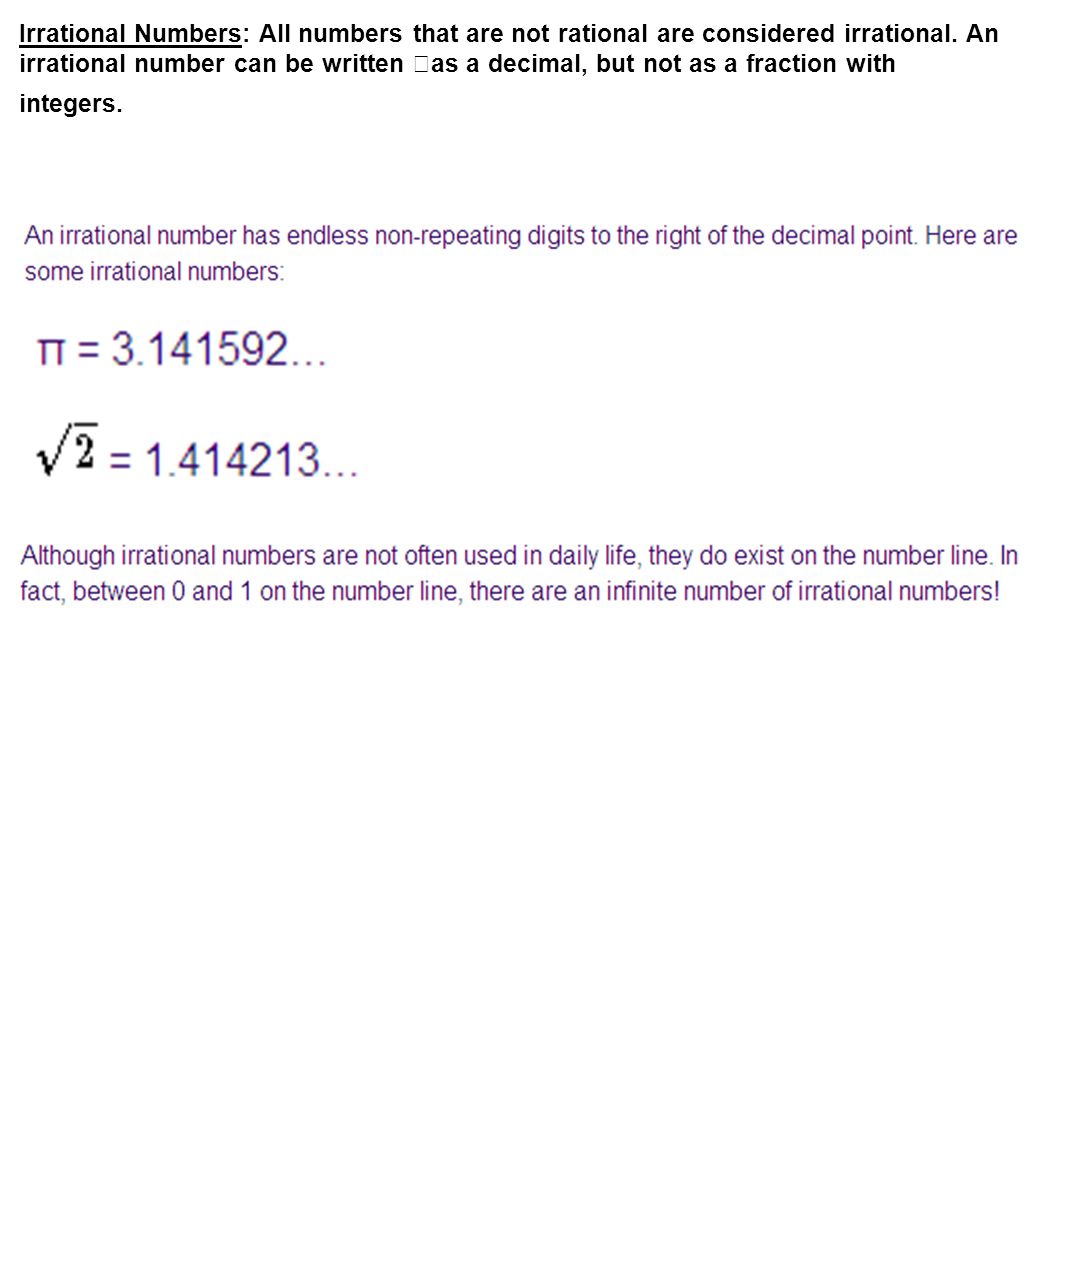 Irrational Numbers: All numbers that are not rational are considered irrational.